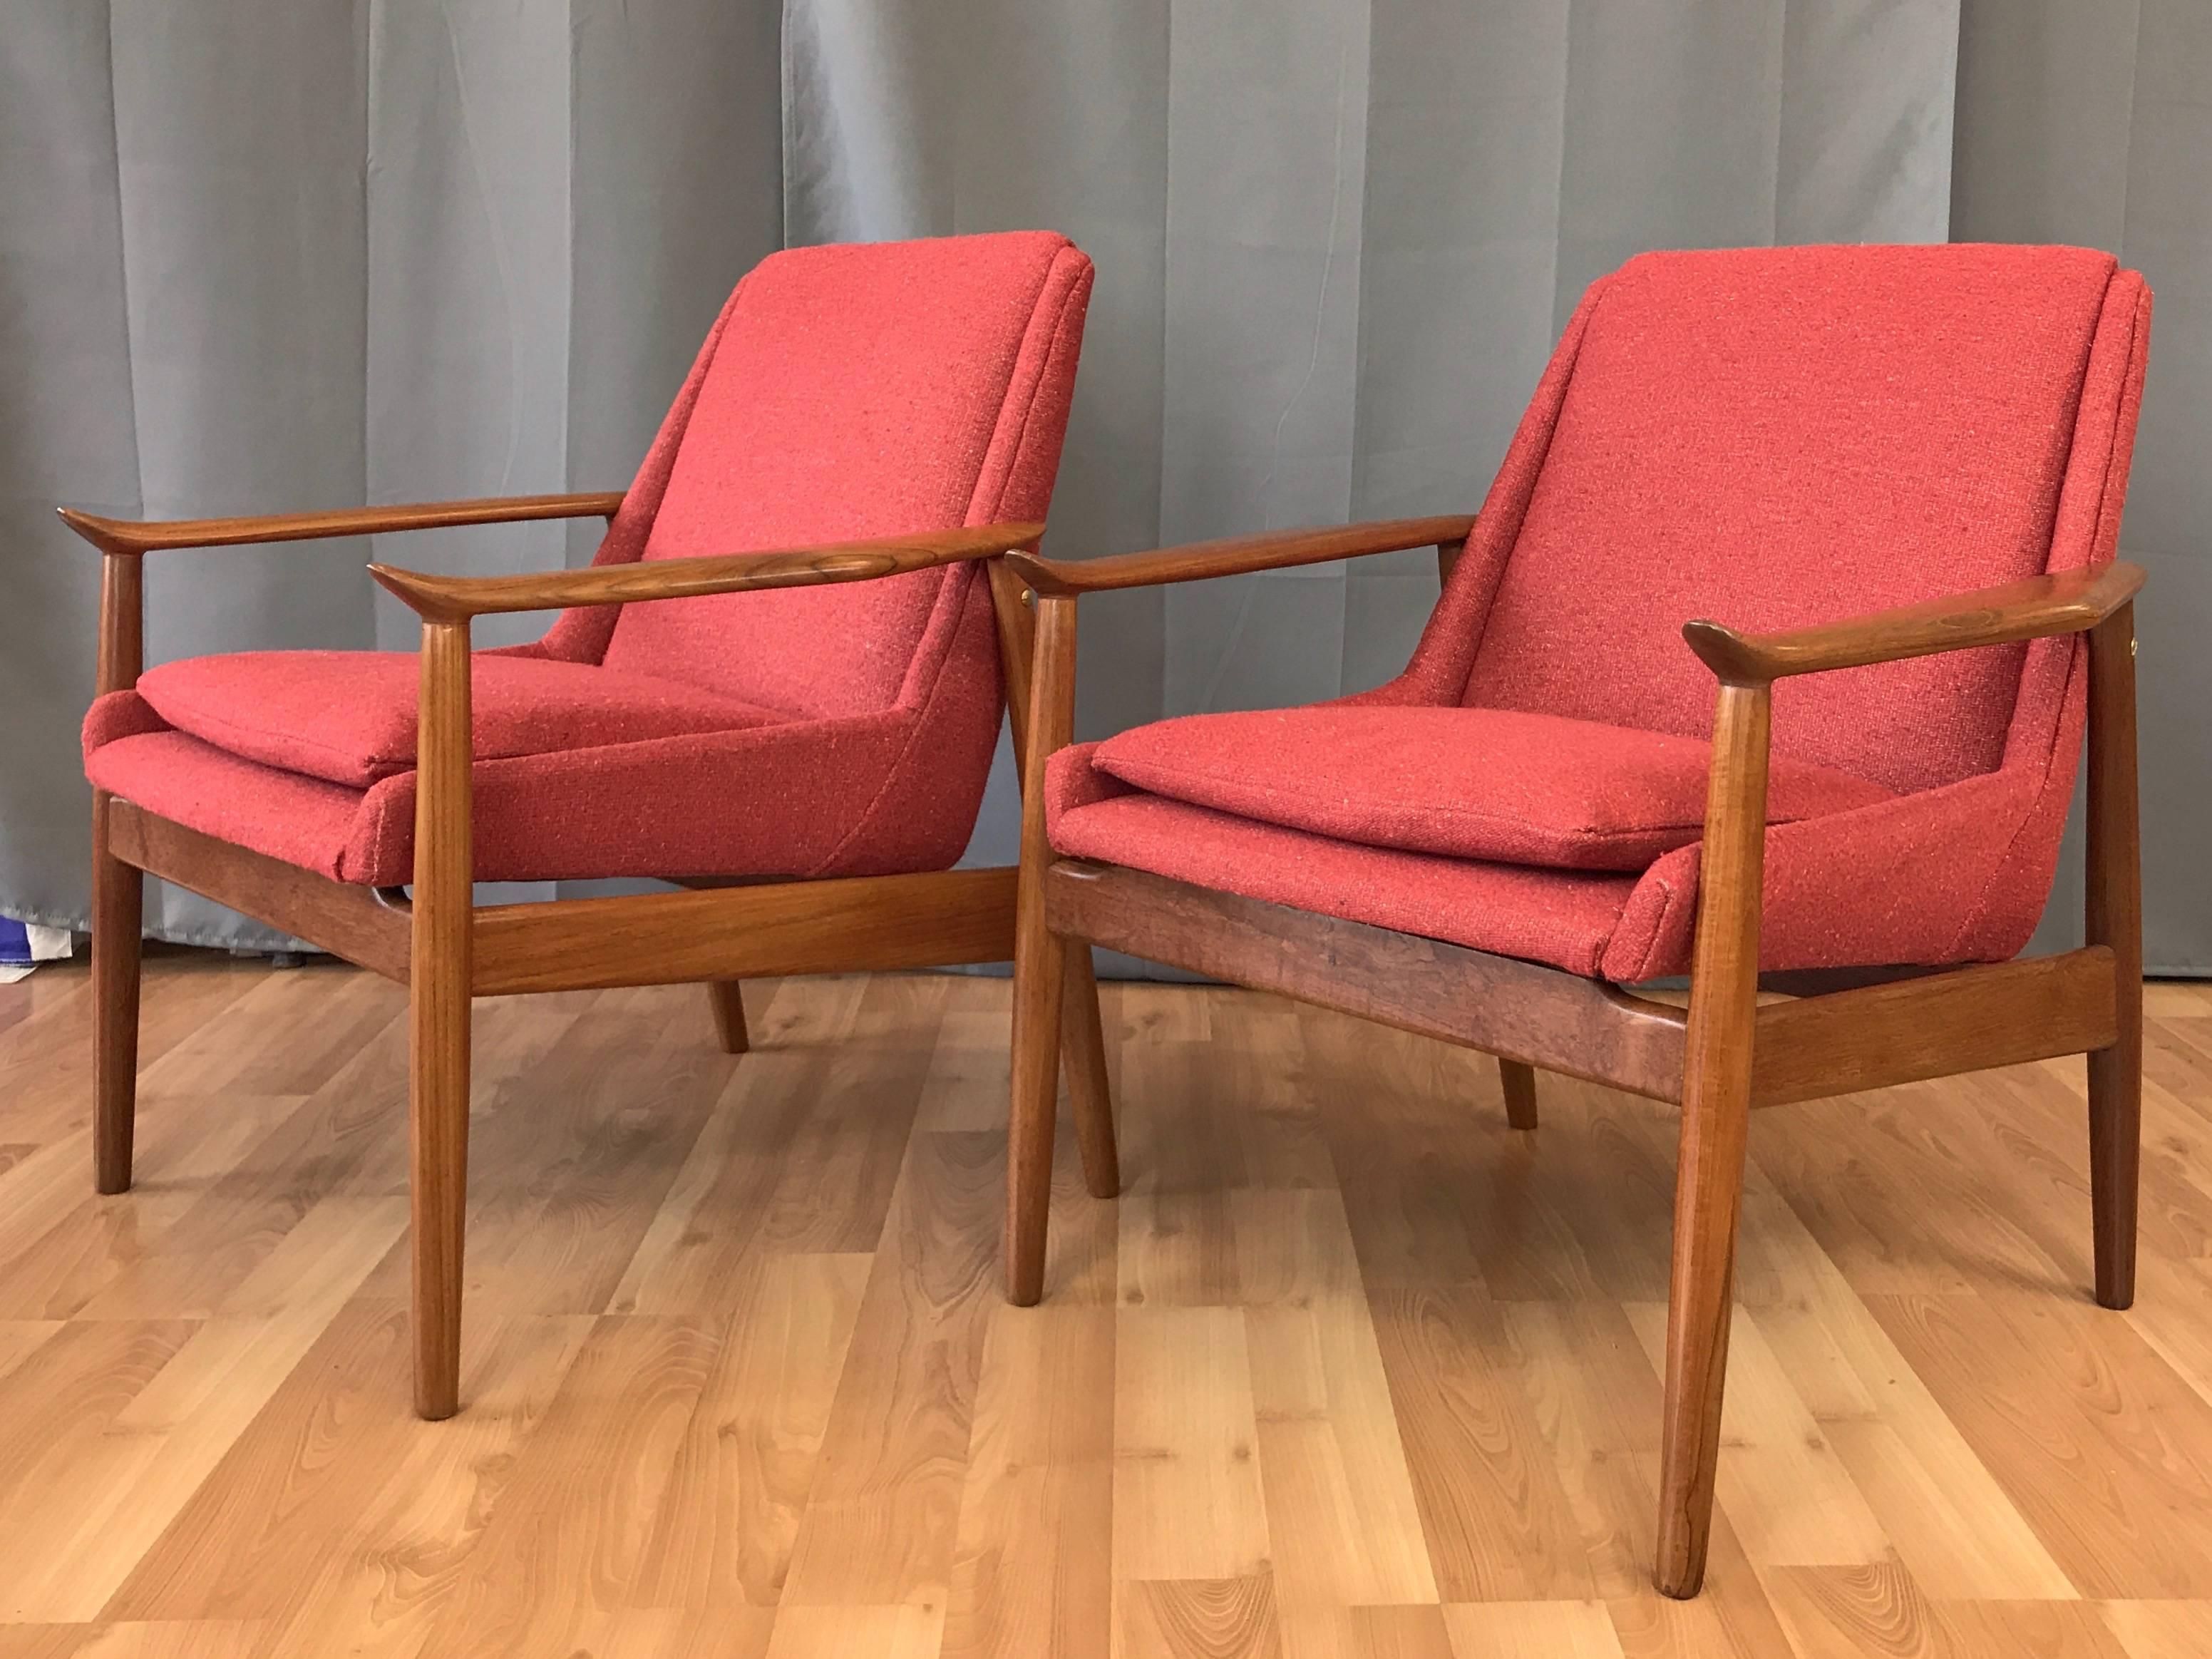 A very rare pair of No. 810 teak lounge chairs by Arne Vodder for Slagelse Møbelværk, and retailed by Illums Bolighus.

Solid teak frame is distinguished by exquisitely sculpted arms with distinctive ski-like tips that attract both the eye and the